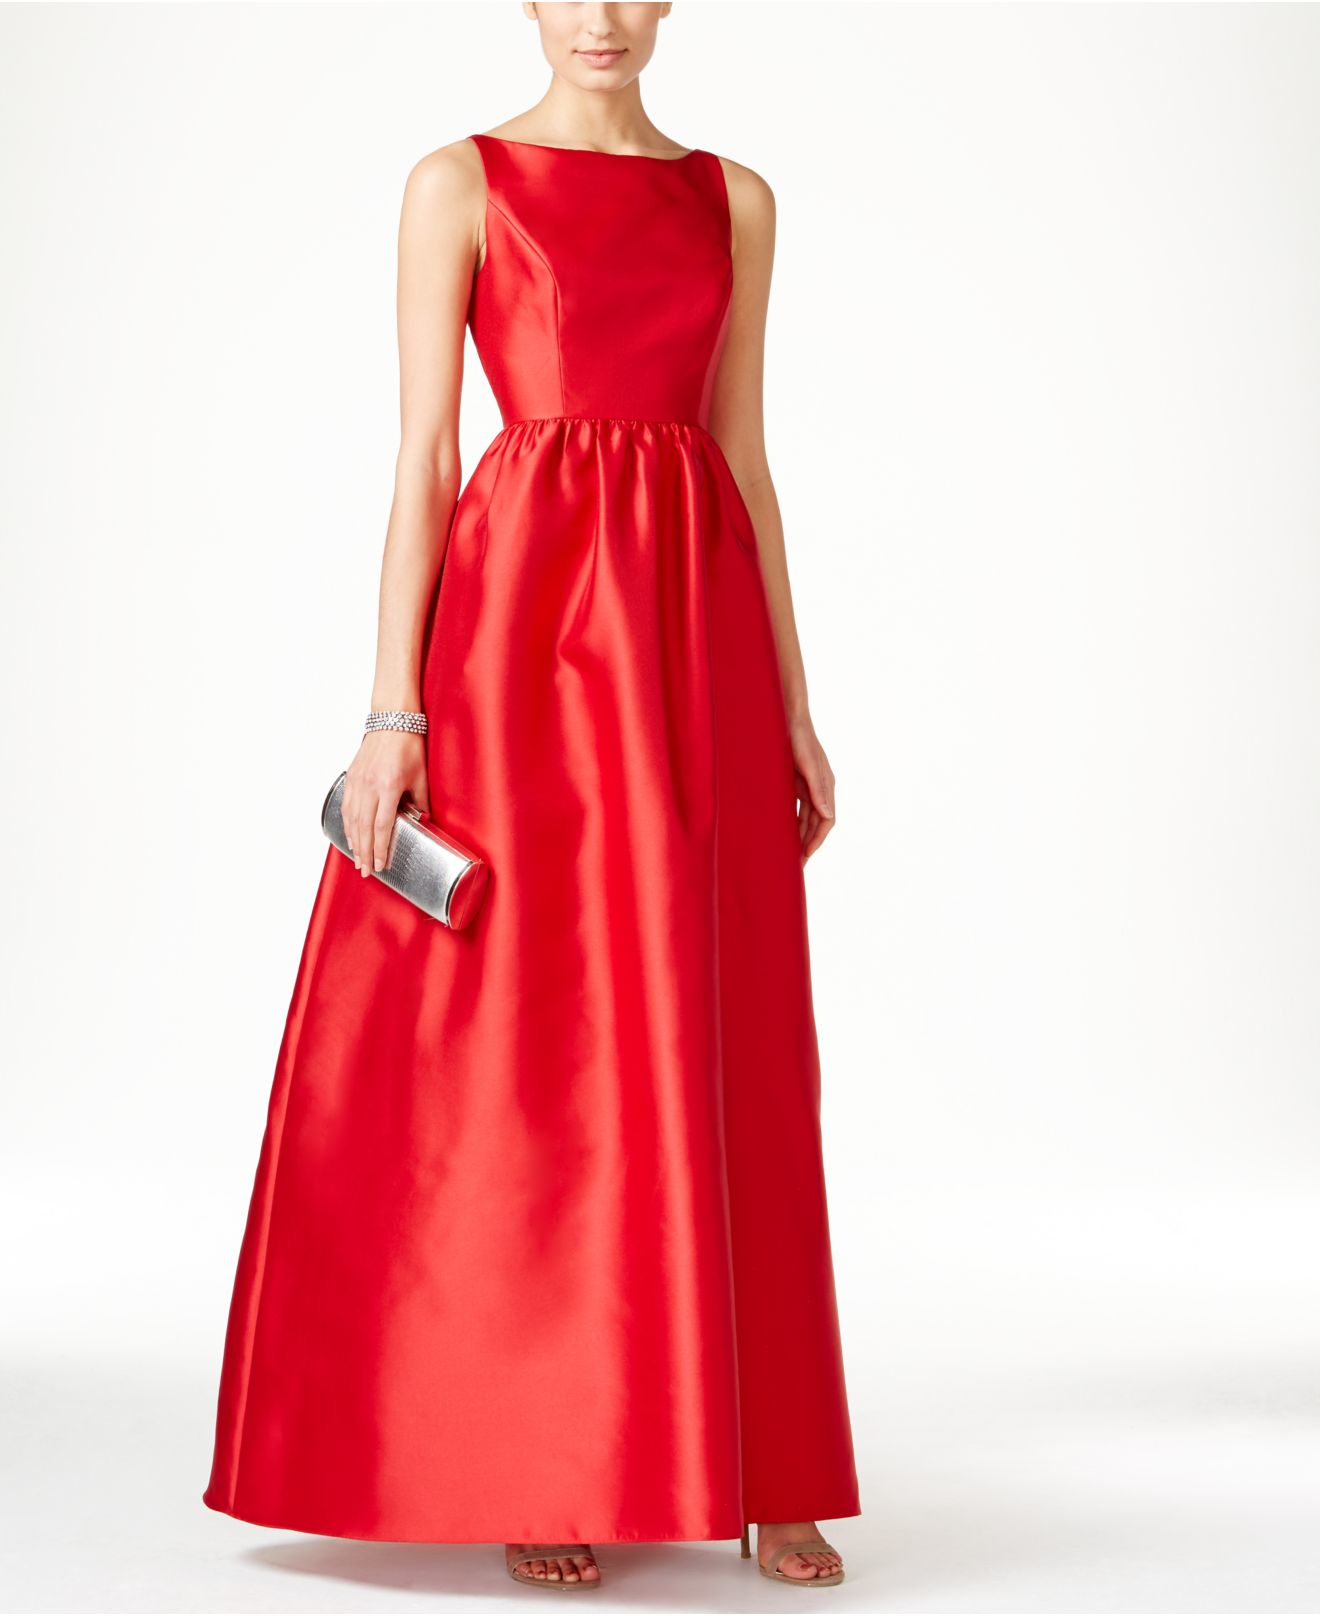 Lyst - Adrianna papell Sleeveless Ball Gown in Red